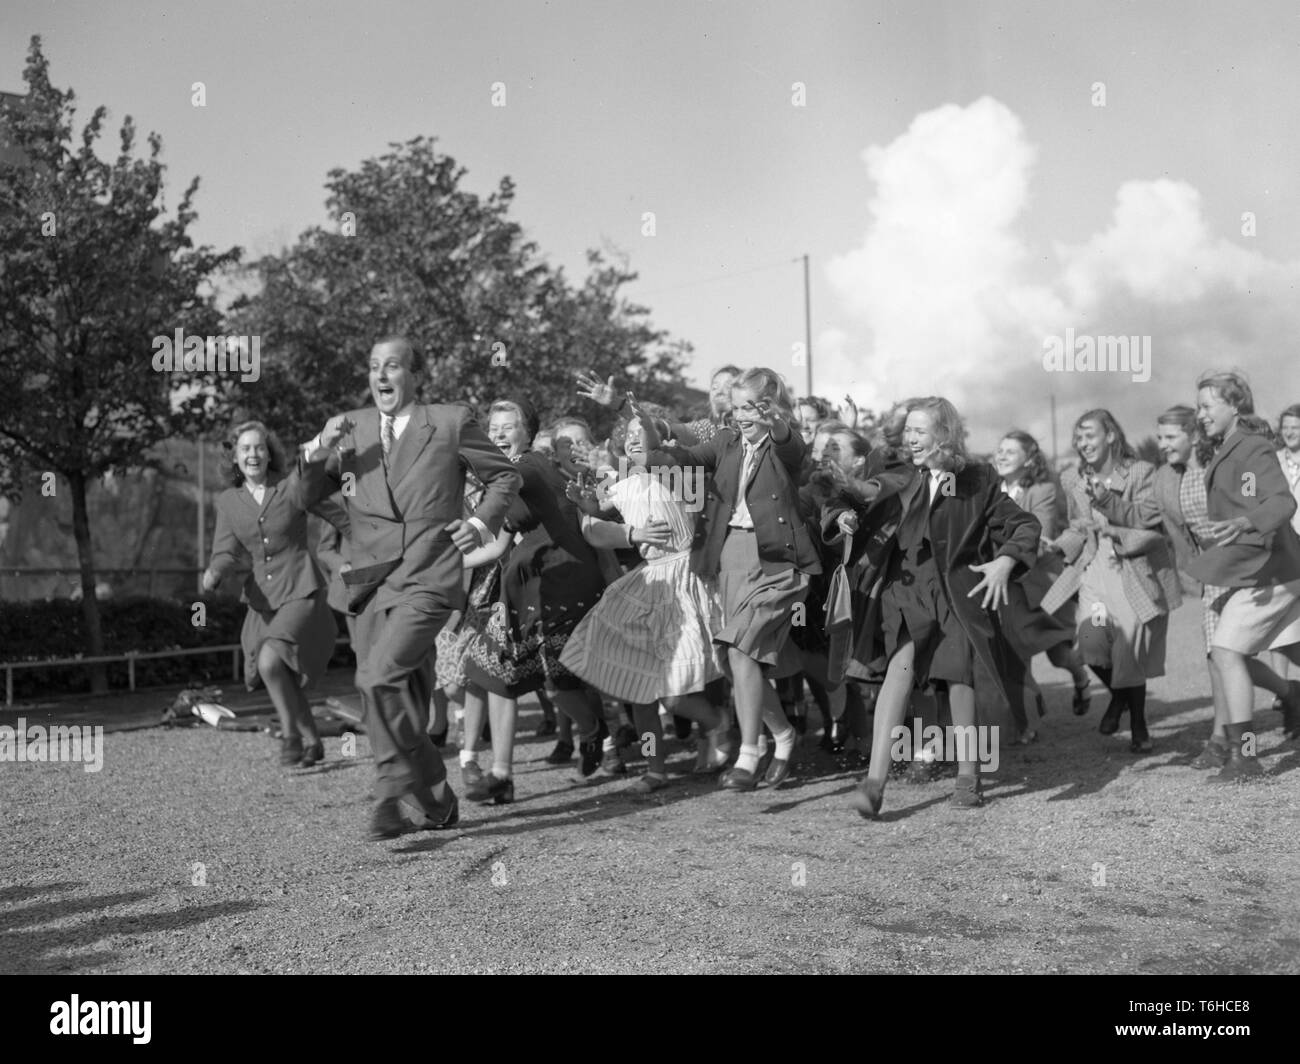 1940s man. A man is being chased by women running after him with their arms out like they would like to catch him.  Photo Kristoffersson ref 223A-11. Sweden 1948 Stock Photo